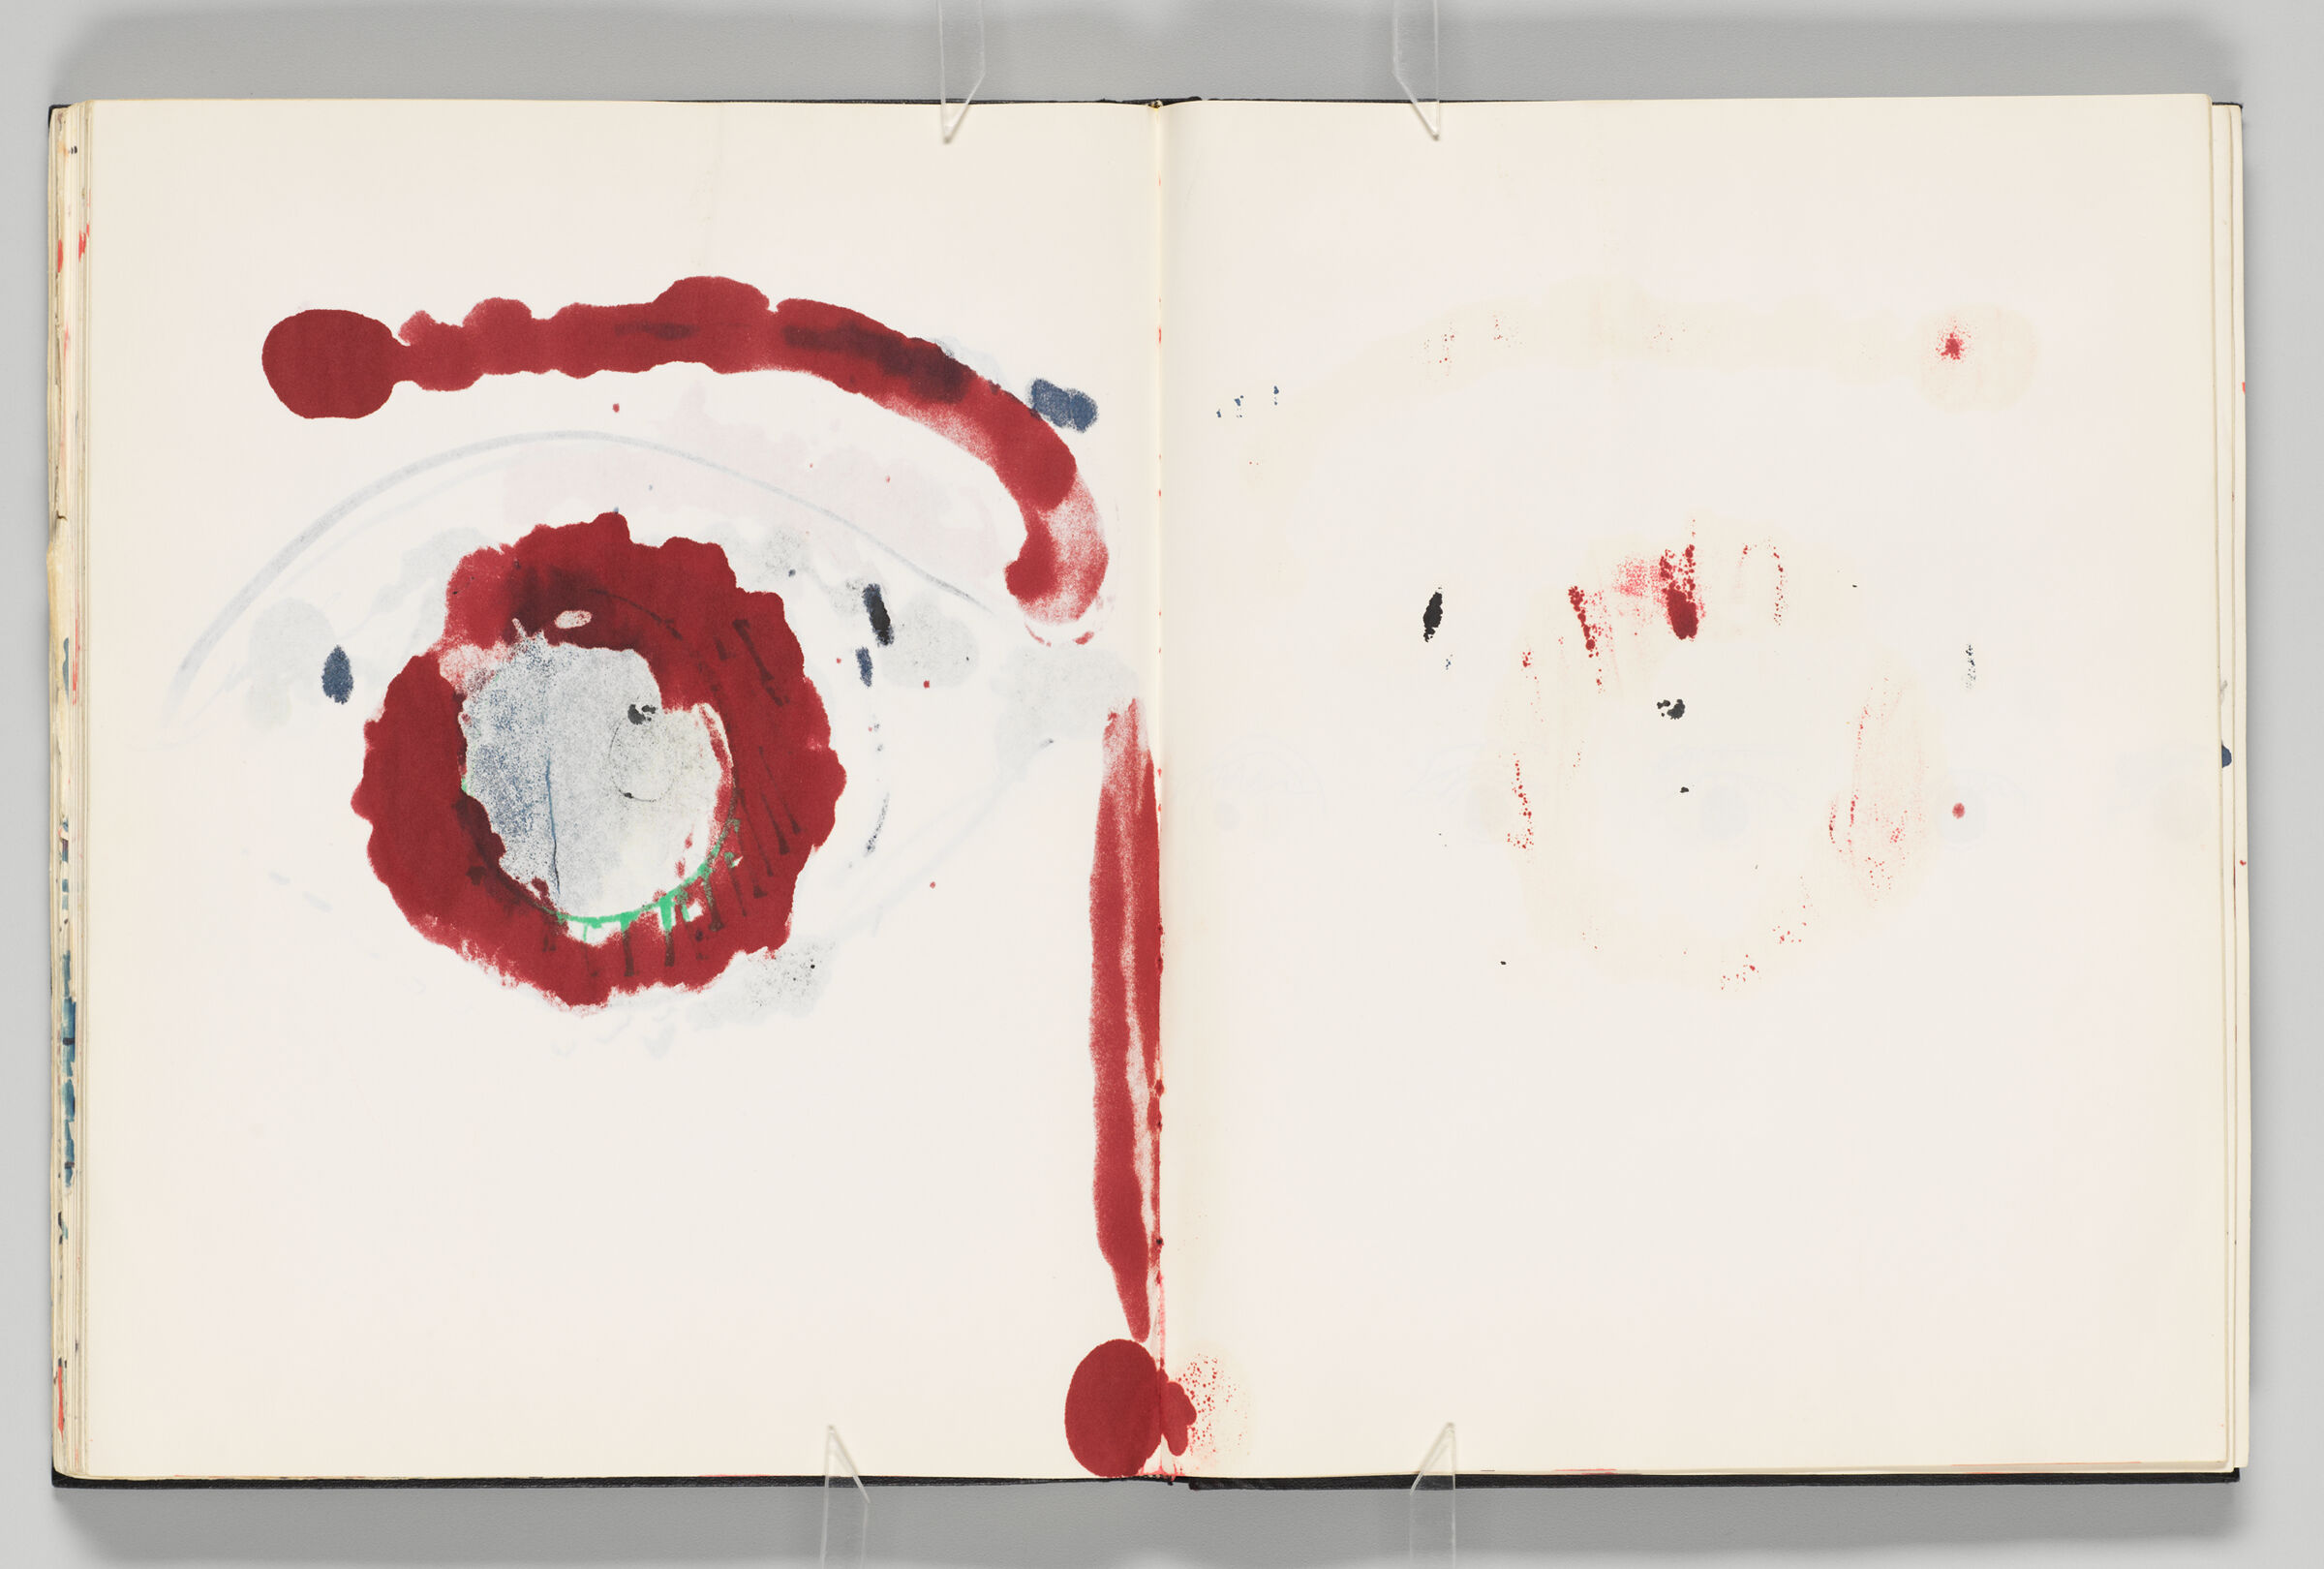 Untitled (Bleed-Through Of Previous Page, Left Page); Untitled (Color Transfer, Right Page)